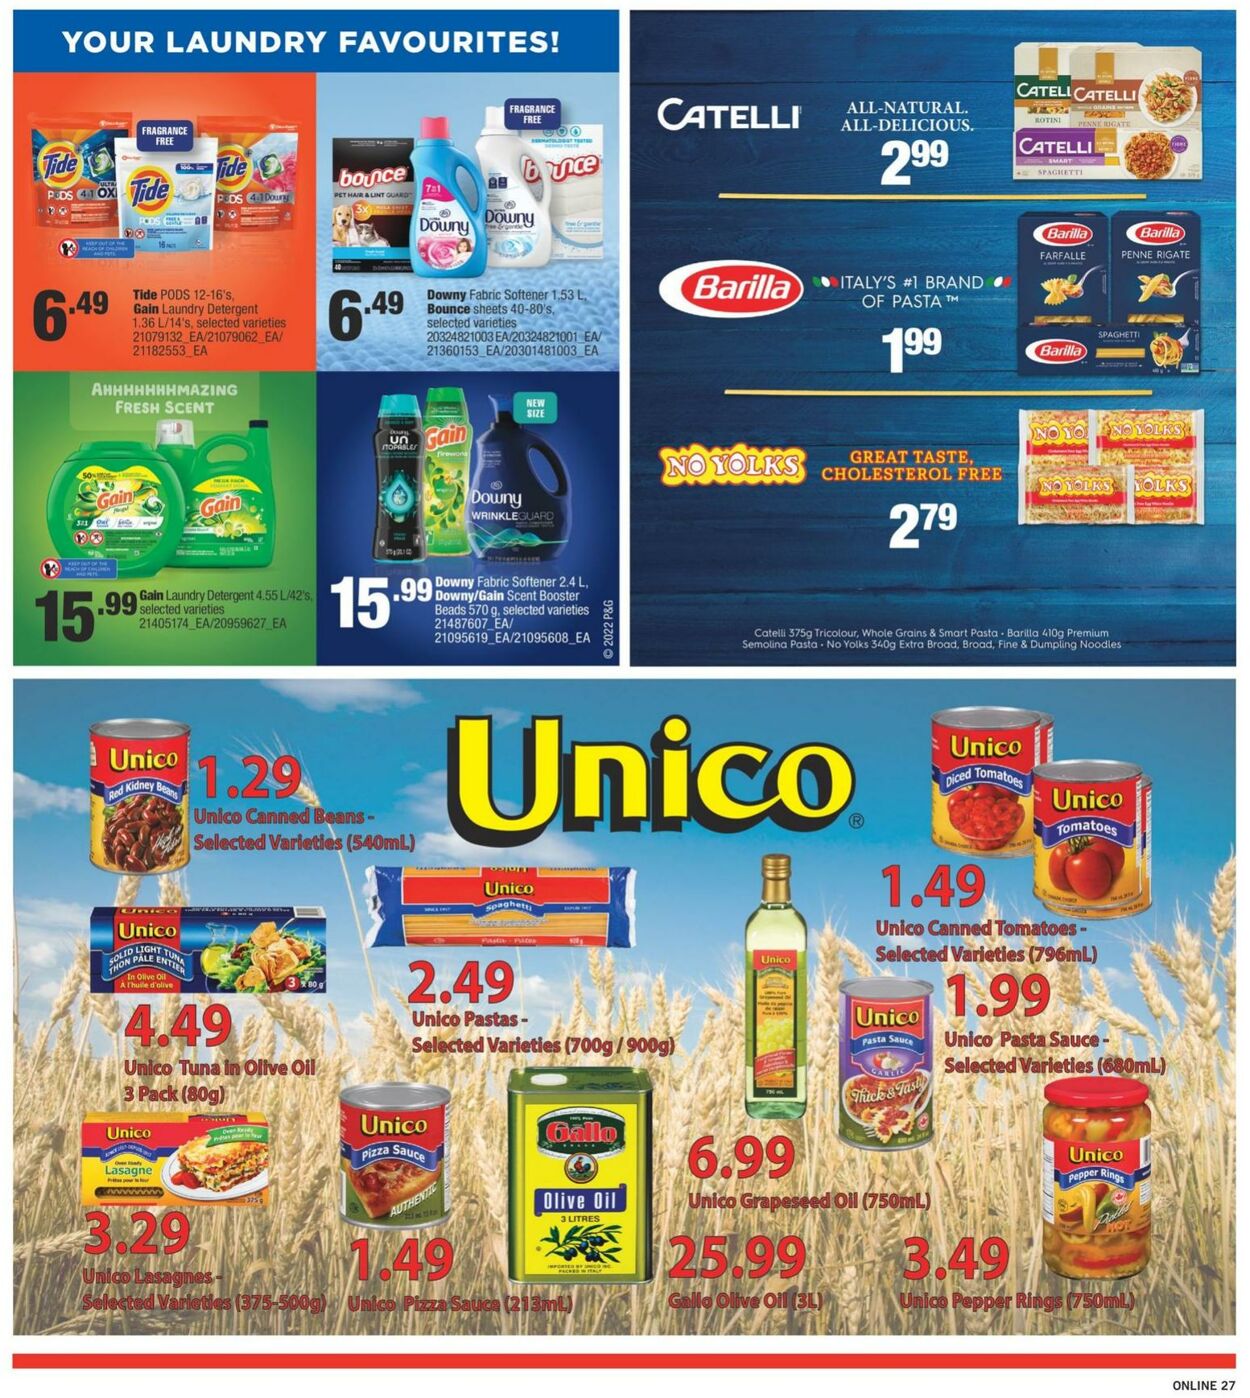 Fortinos Promotional Flyer - Christmas - Valid from 22.12 to 28.12 ...